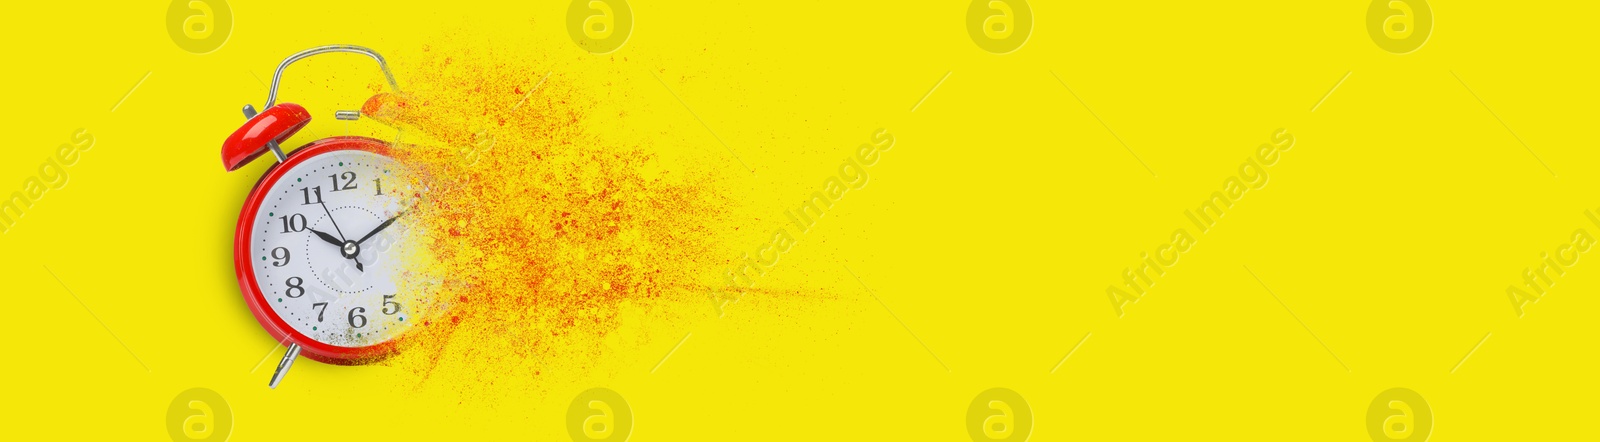 Image of Red alarm clock dissolving on yellow background, banner design with space for text. Flow of time